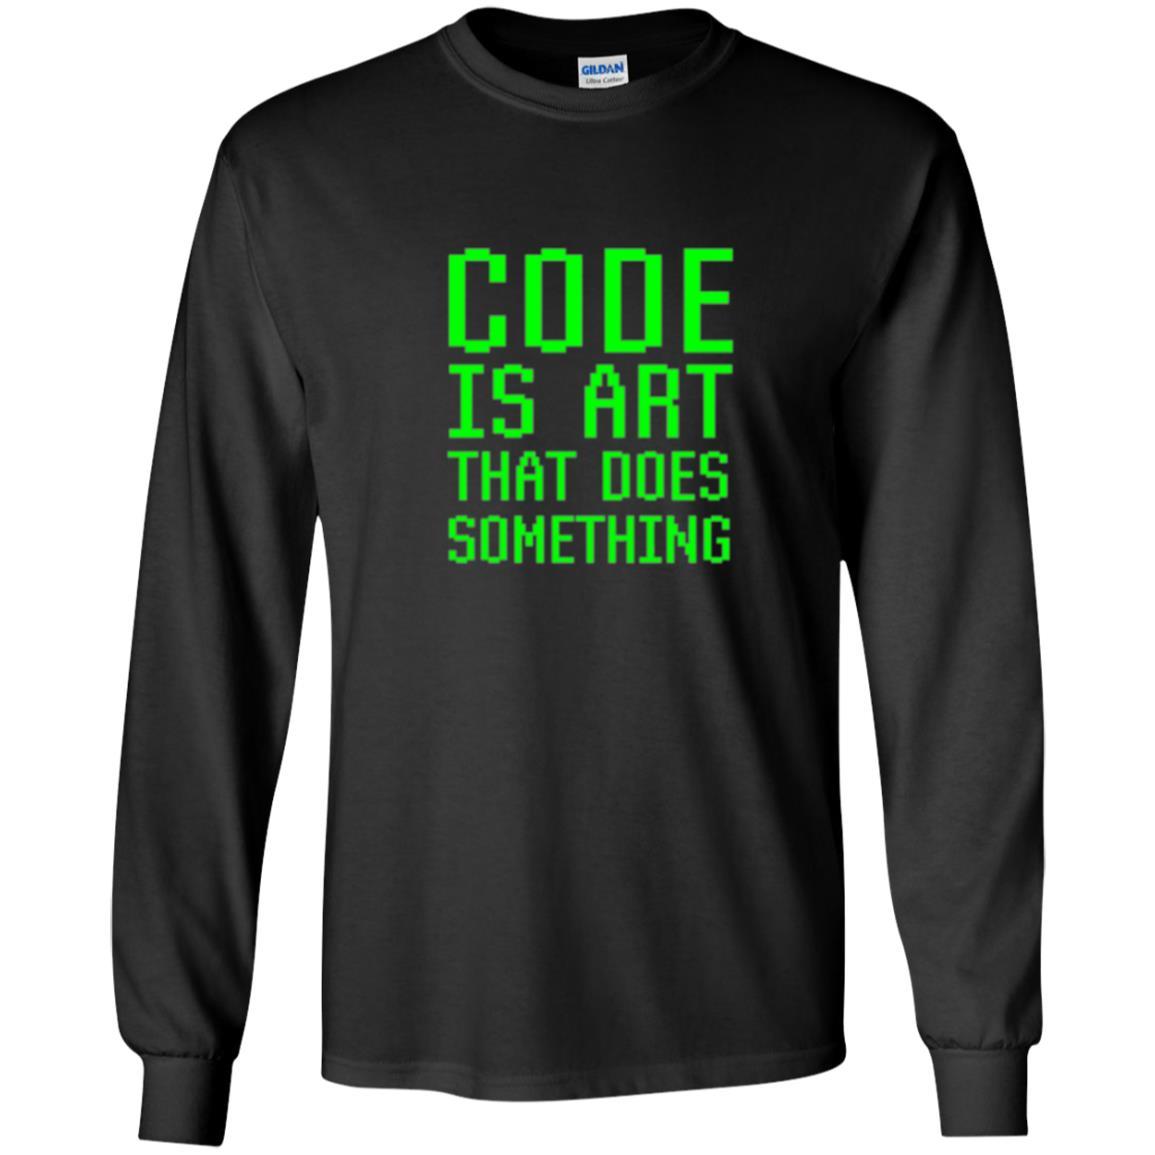 Coder T-shirt Code Is Art That Does Something